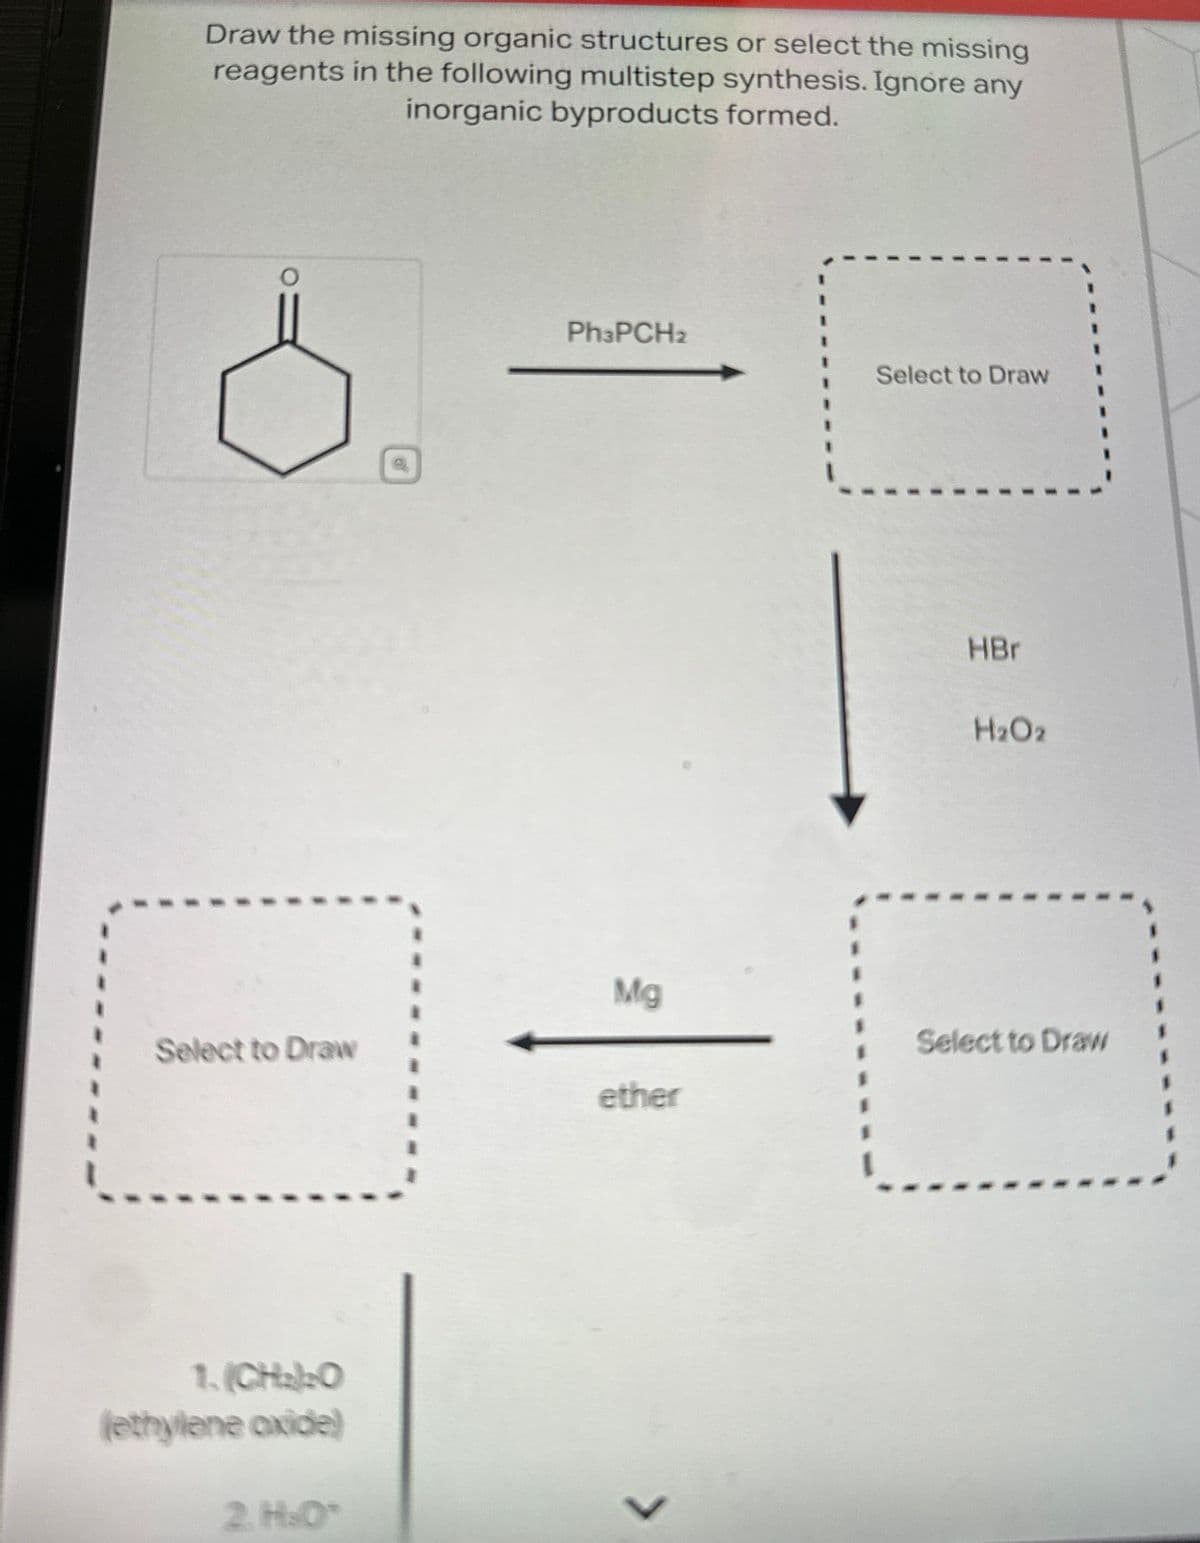 Draw the missing organic structures or select the missing
reagents in the following multistep synthesis. Ignore any
inorganic byproducts formed.
Ph3PCH2
Select to Draw
HBr
H2O2
Mg
Select to Draw
Select to Draw
ether
1. (CH2)2O
(ethylene oxide)
2.H.O
L